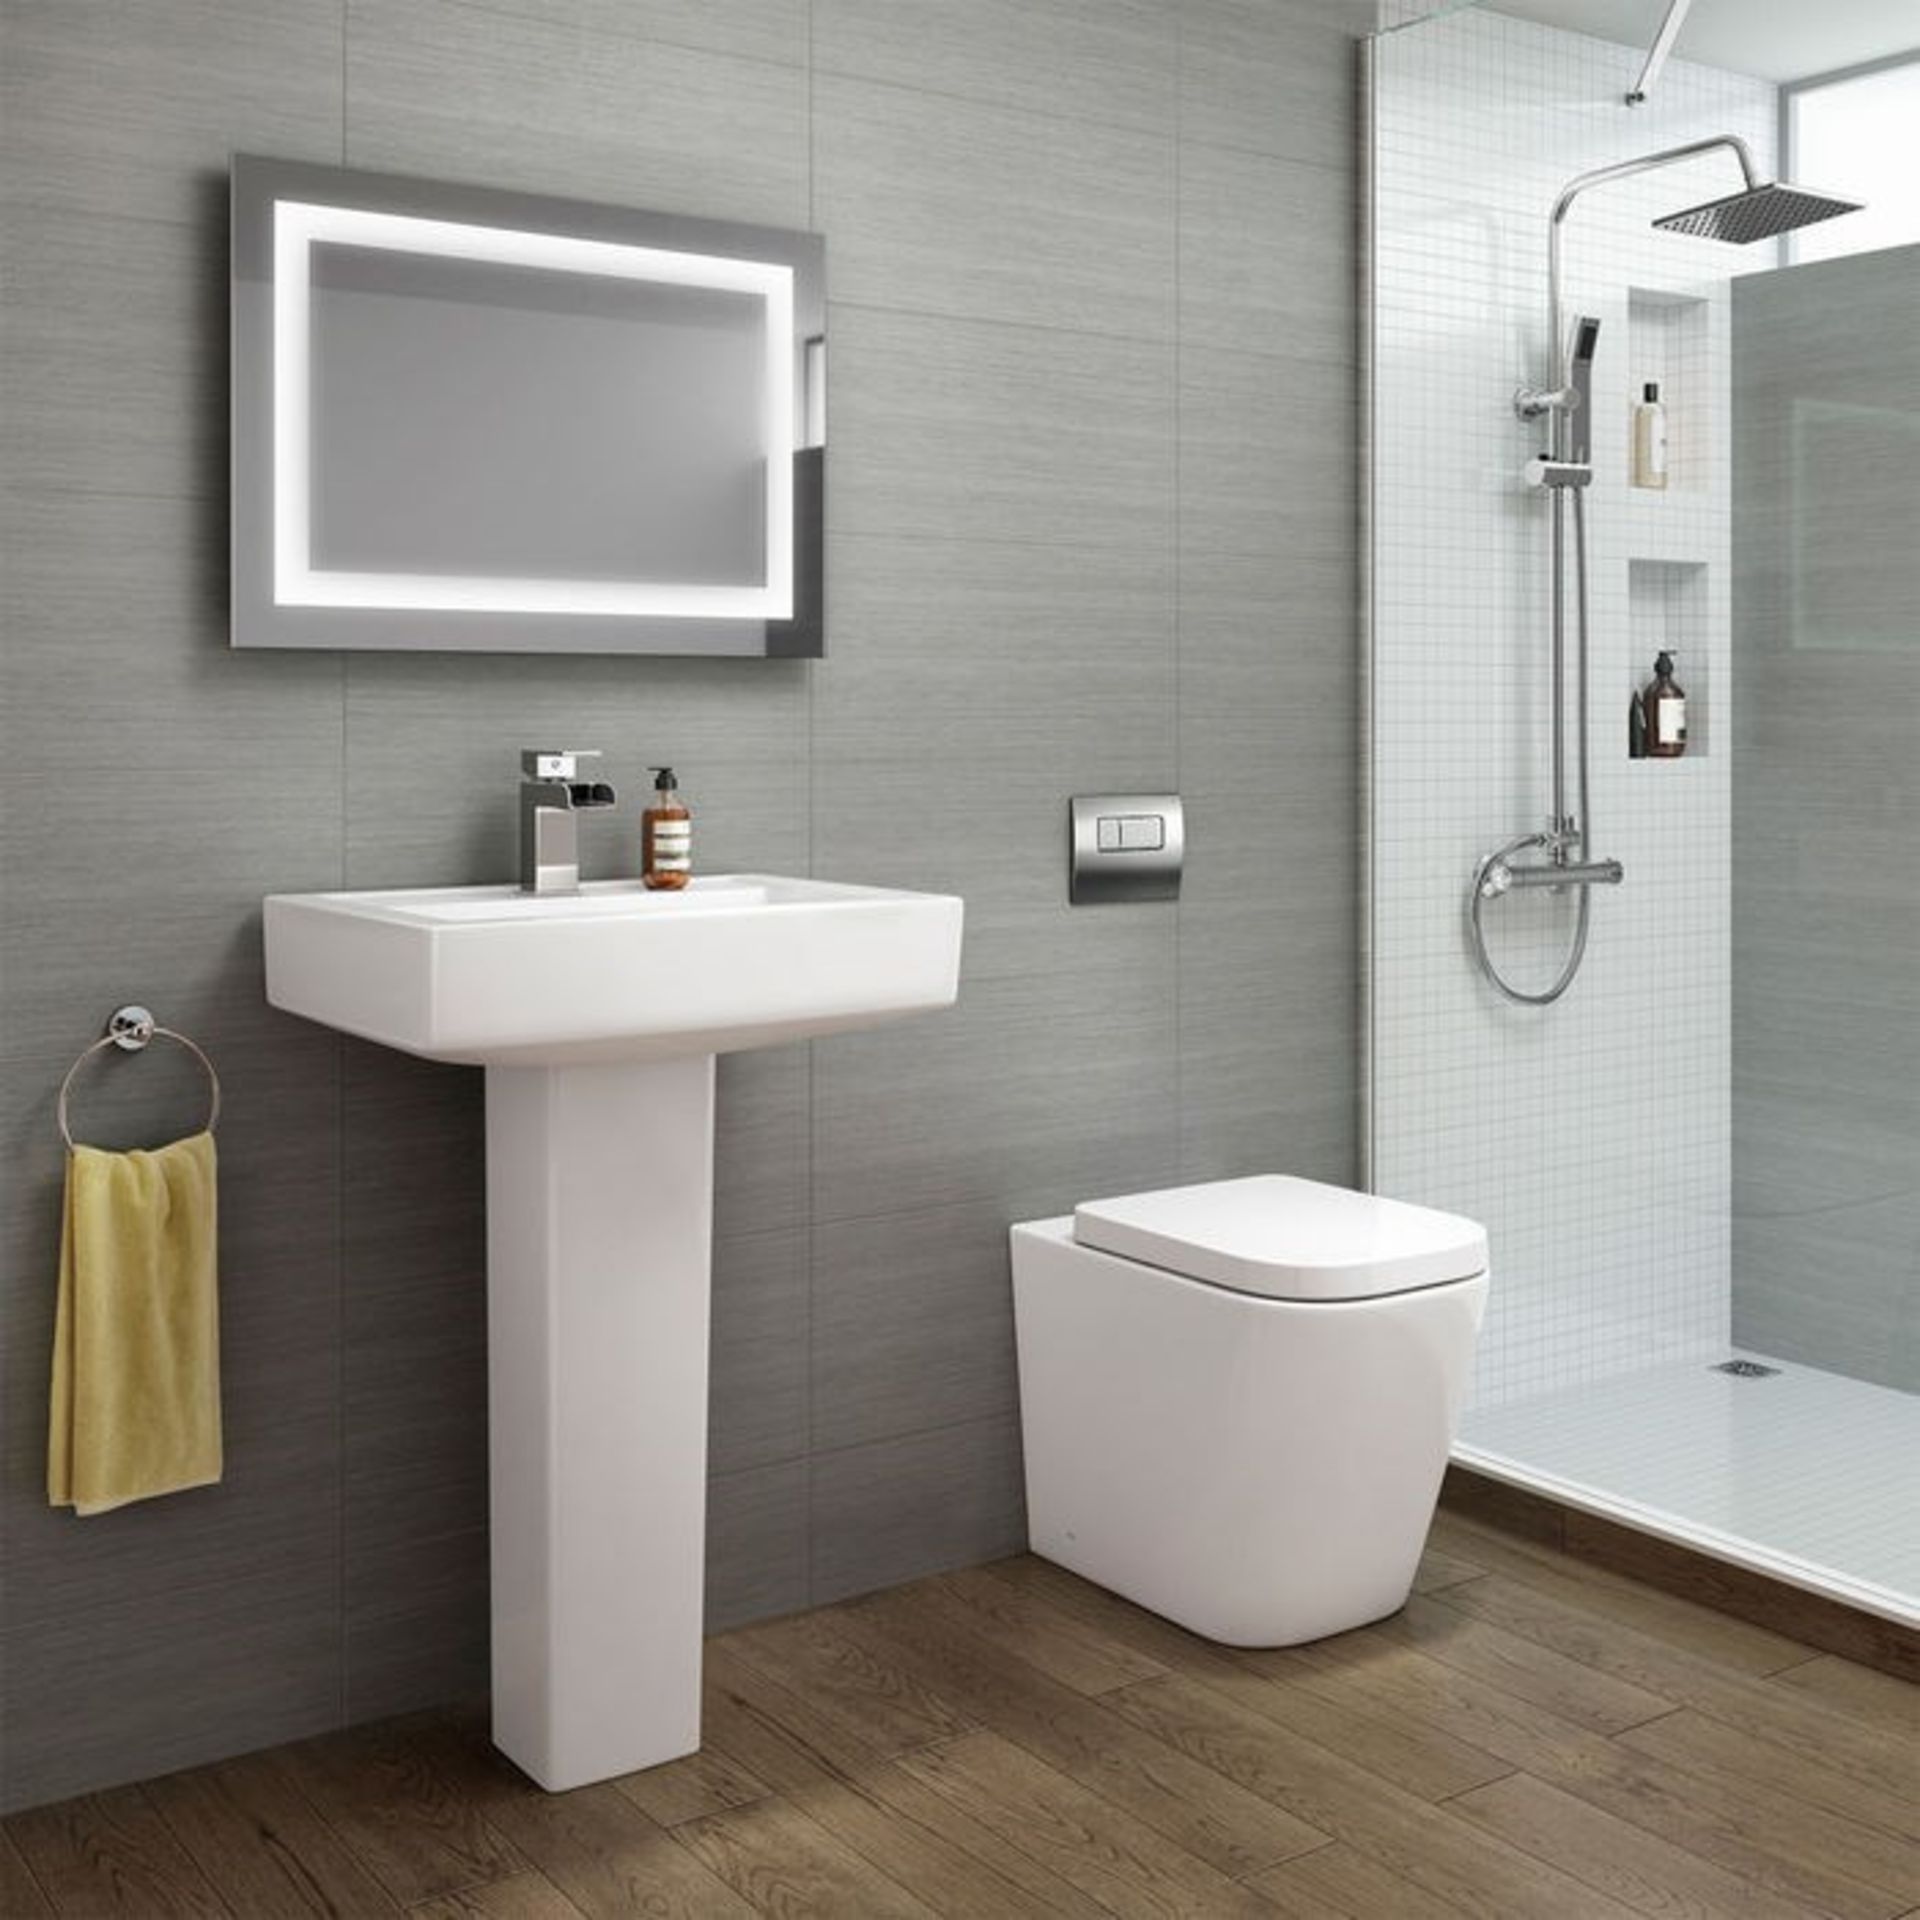 BRAND NEW BOXED Florence Rimless Back to Wall Toilet inc Luxury Soft Close Seat. RRP £349.99. ... - Image 2 of 3